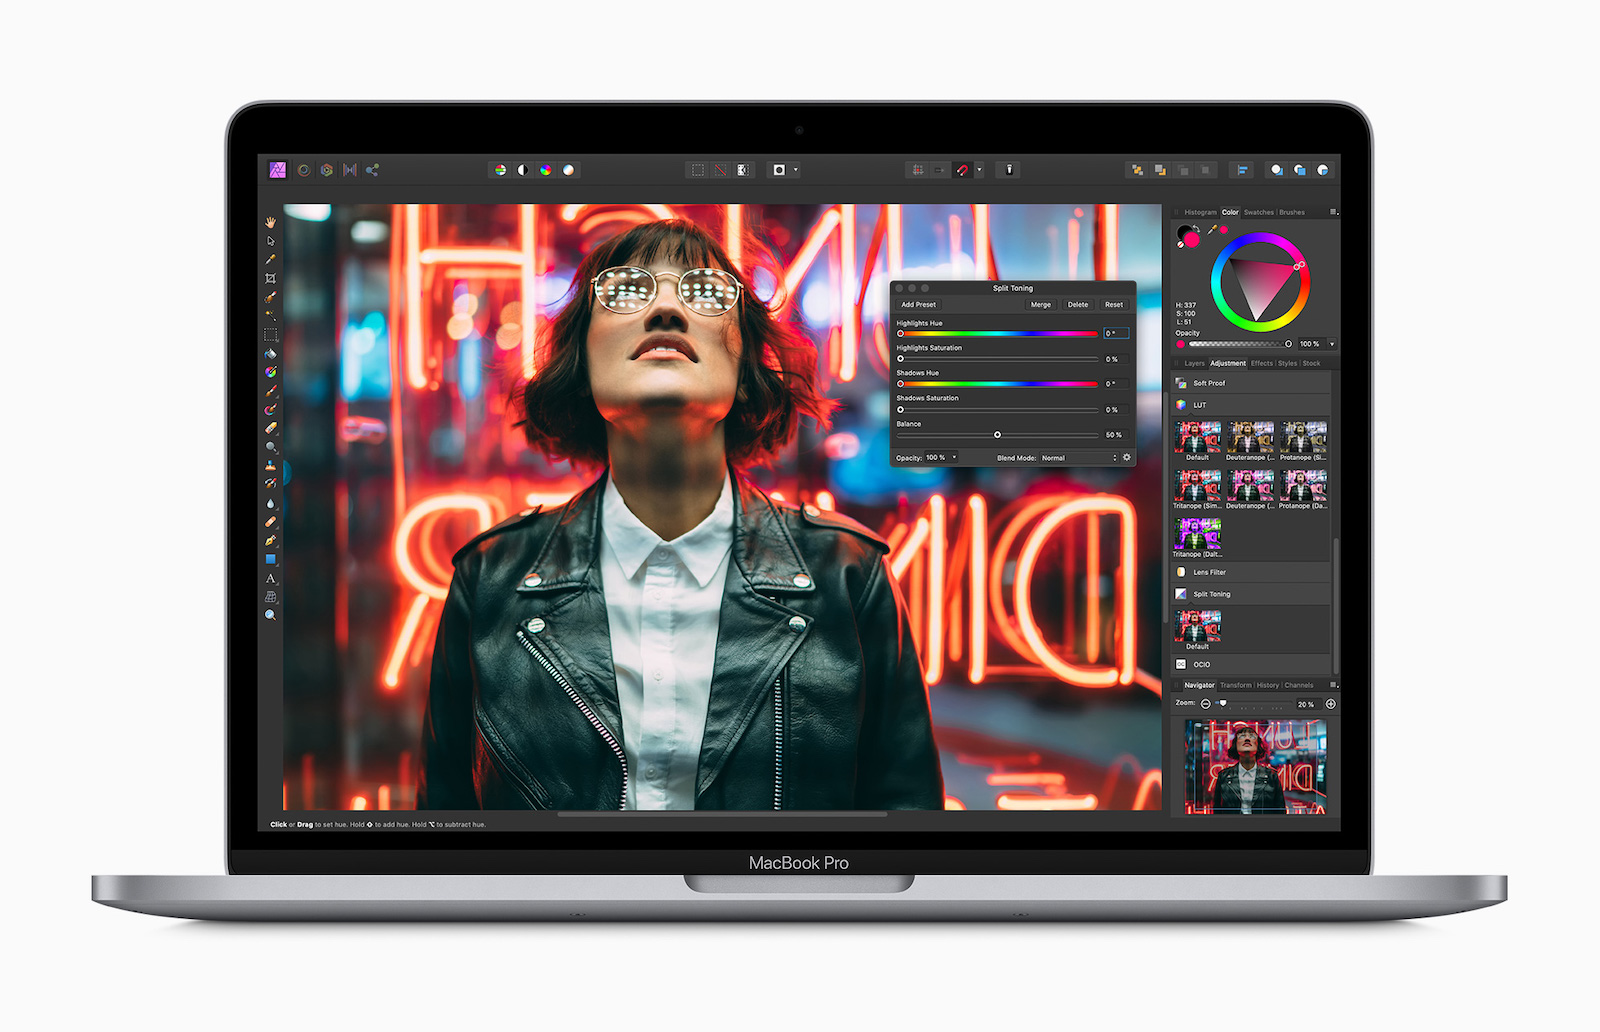 Apple_macbook_pro-13-inch-with-affinity-photo_screen_05042020.jpg